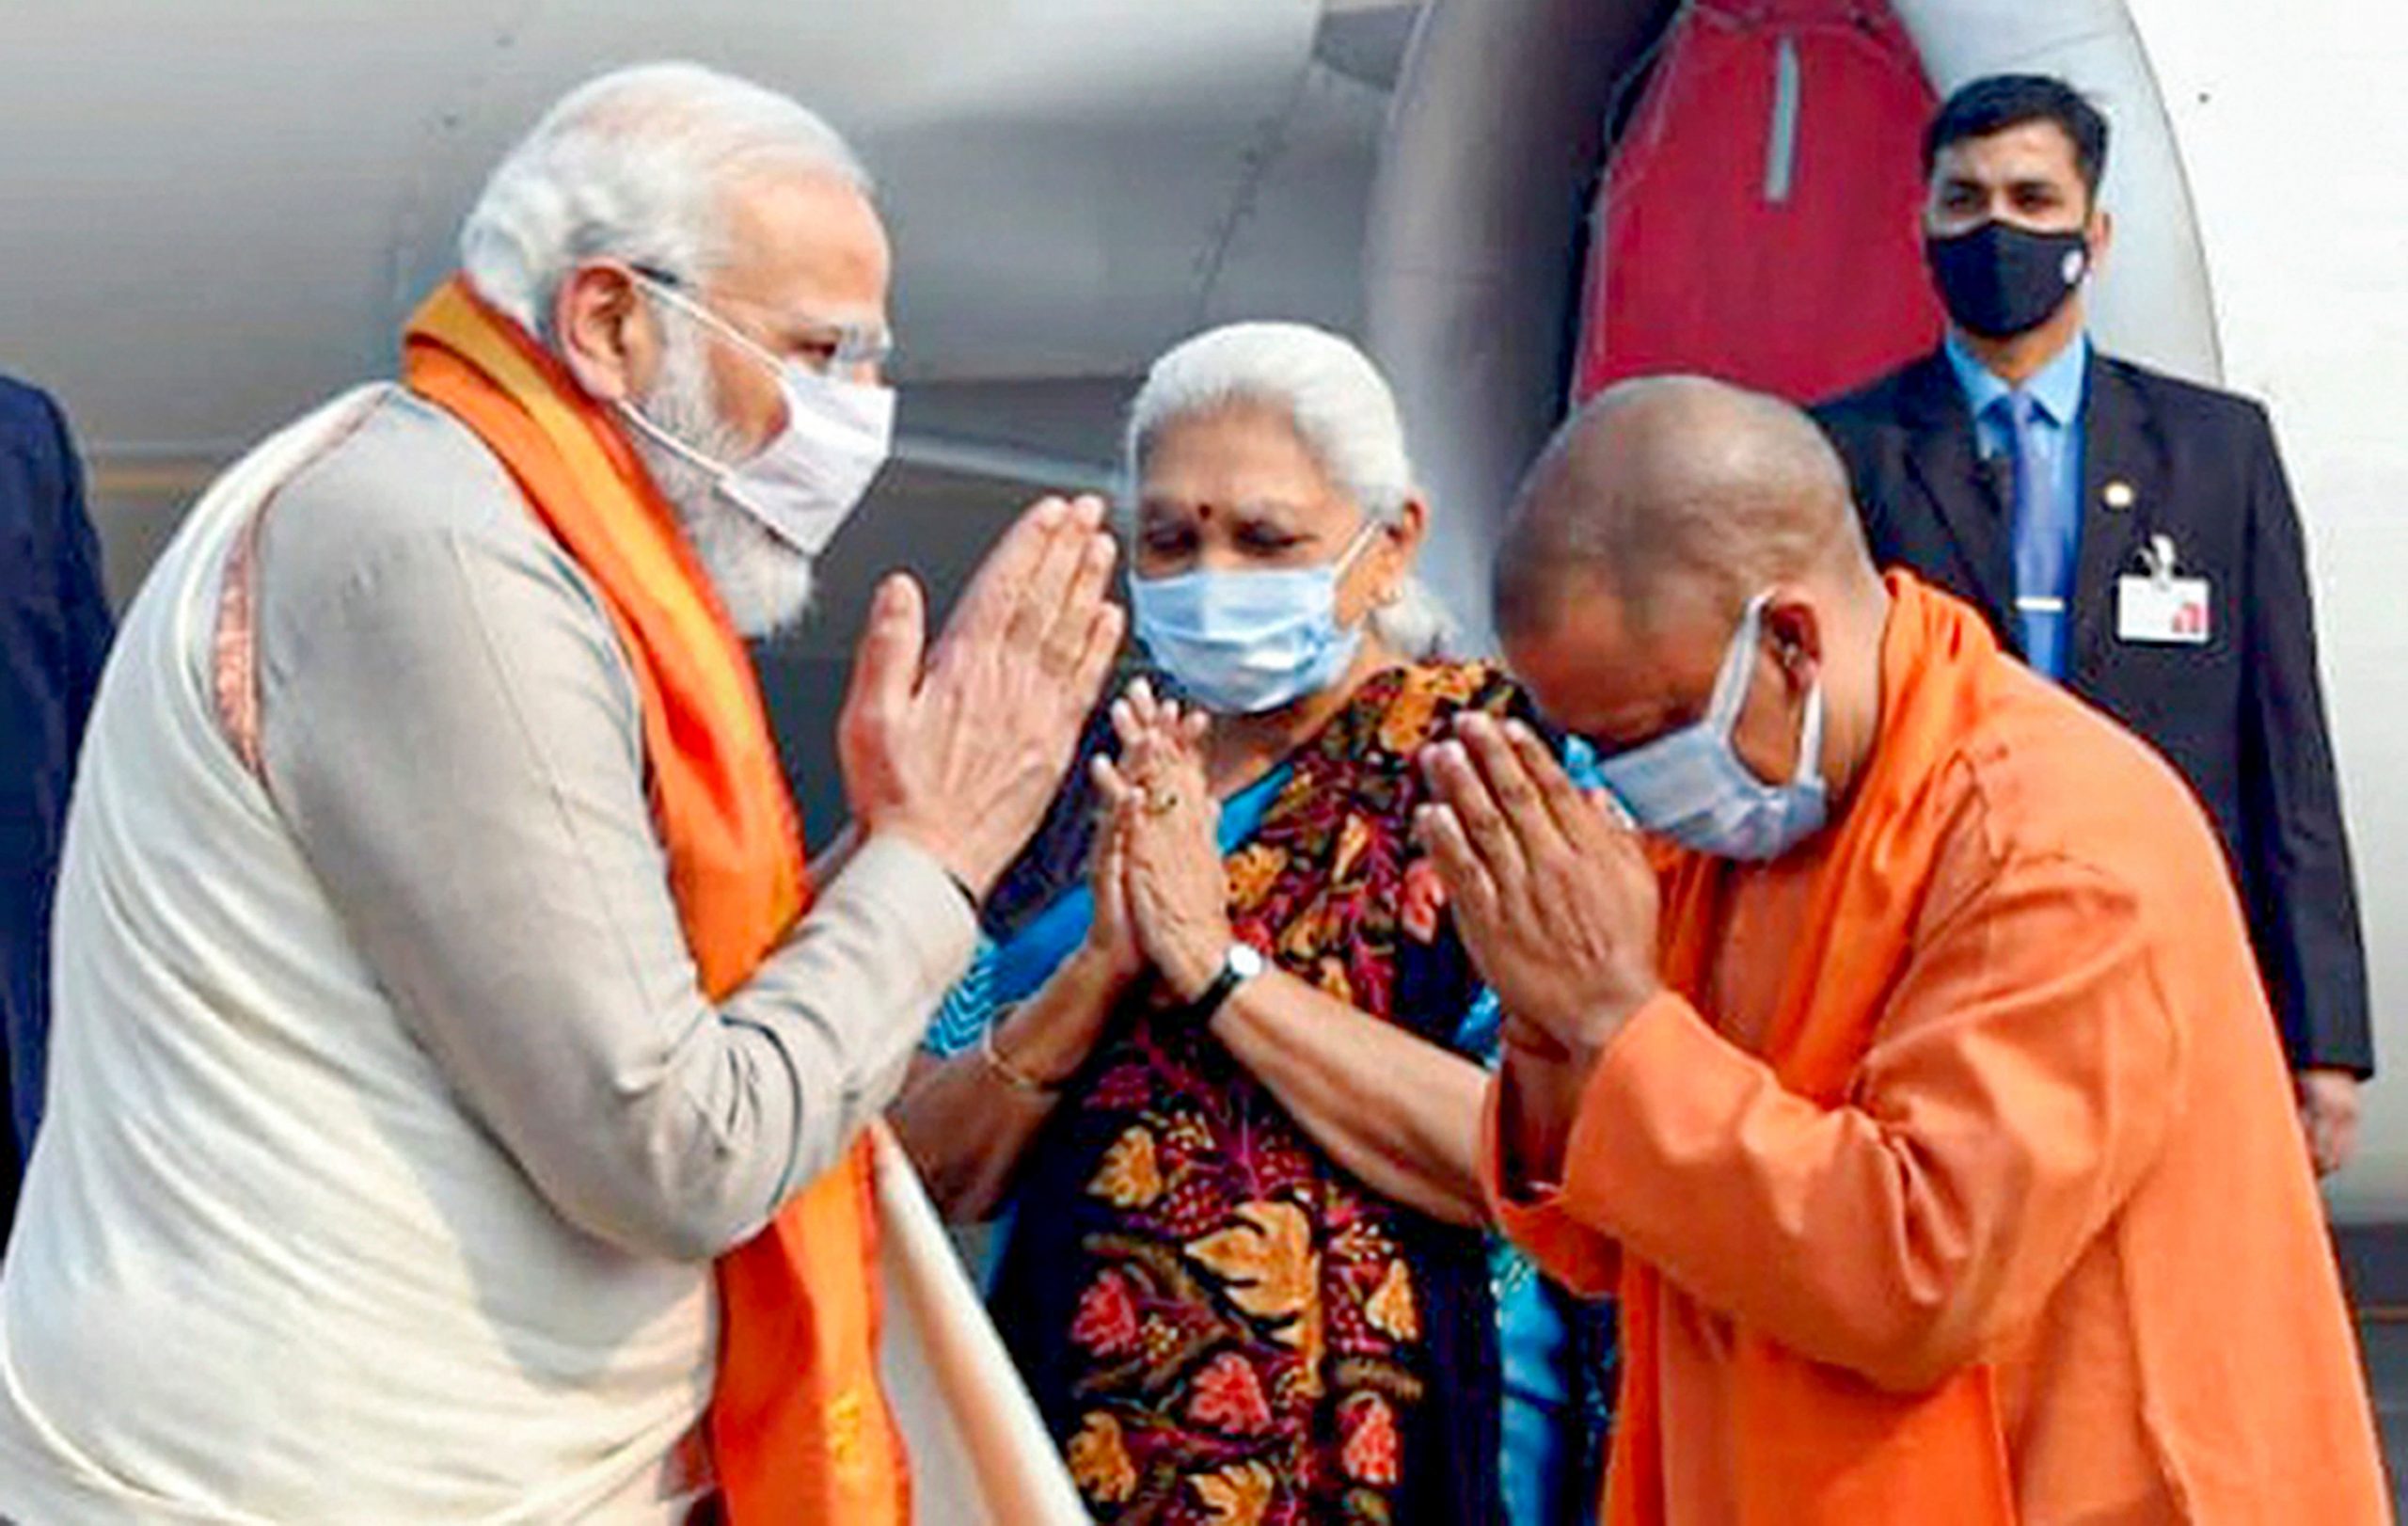 Watch: PM Modi stops convoy on Varanasi street to accept turban, scarf from local